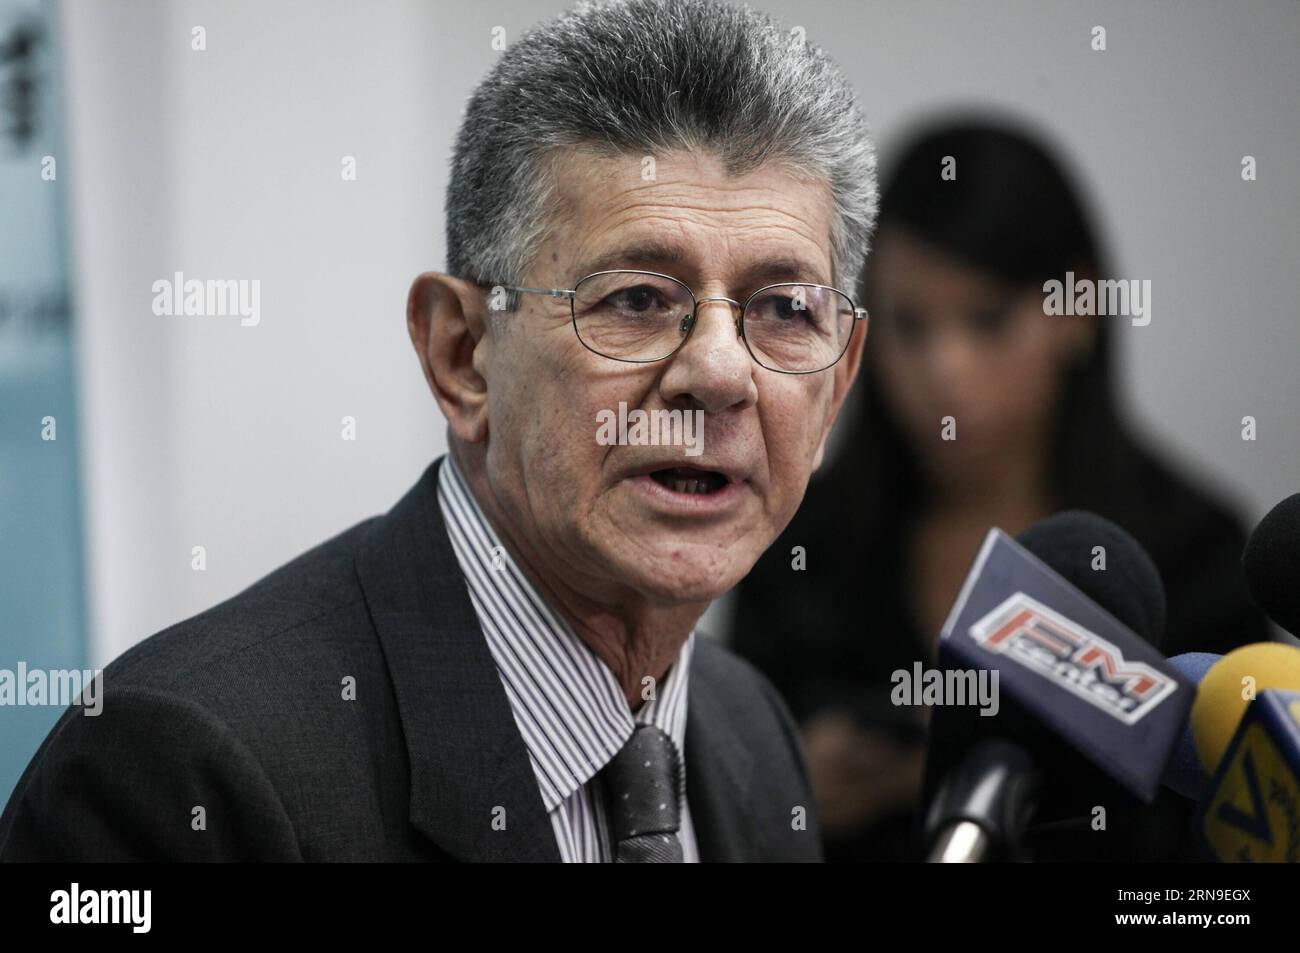 (151201) -- CARACAS, Dec. 1, 2015 -- The representative of the Democratic Unity Movement (MUD, for its acronym in Spanish), Henry Ramos Allup, participates in a press conference, in the Democratic Action (AD, for its acronym in Spanish) headquarters, in Caracas, Venezuela on Dec. 1, 2015. Henry Ramos Allup, demanded the National Electoral Council to respect the legitimate results of the popular expression of the country , and asked the international watchers aiding the electoral process that will take place in the country on Dec. 6, 2015. ) (rtg) (ah) VENEZUELA-CARACAS-POLITICS-ELECTIONS Boris Stock Photo